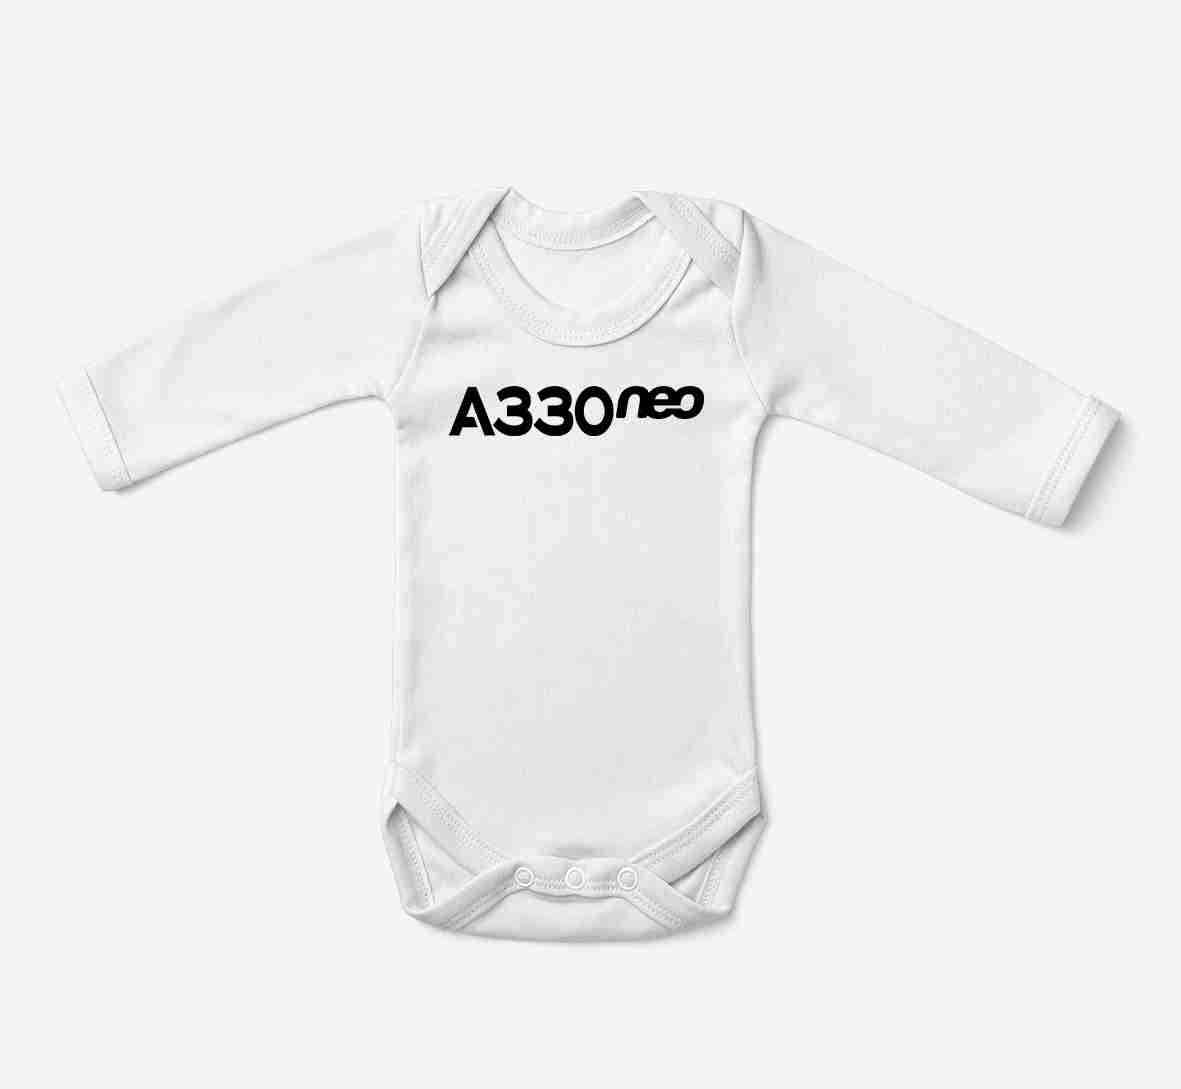 A330neo & Text Designed Baby Bodysuits